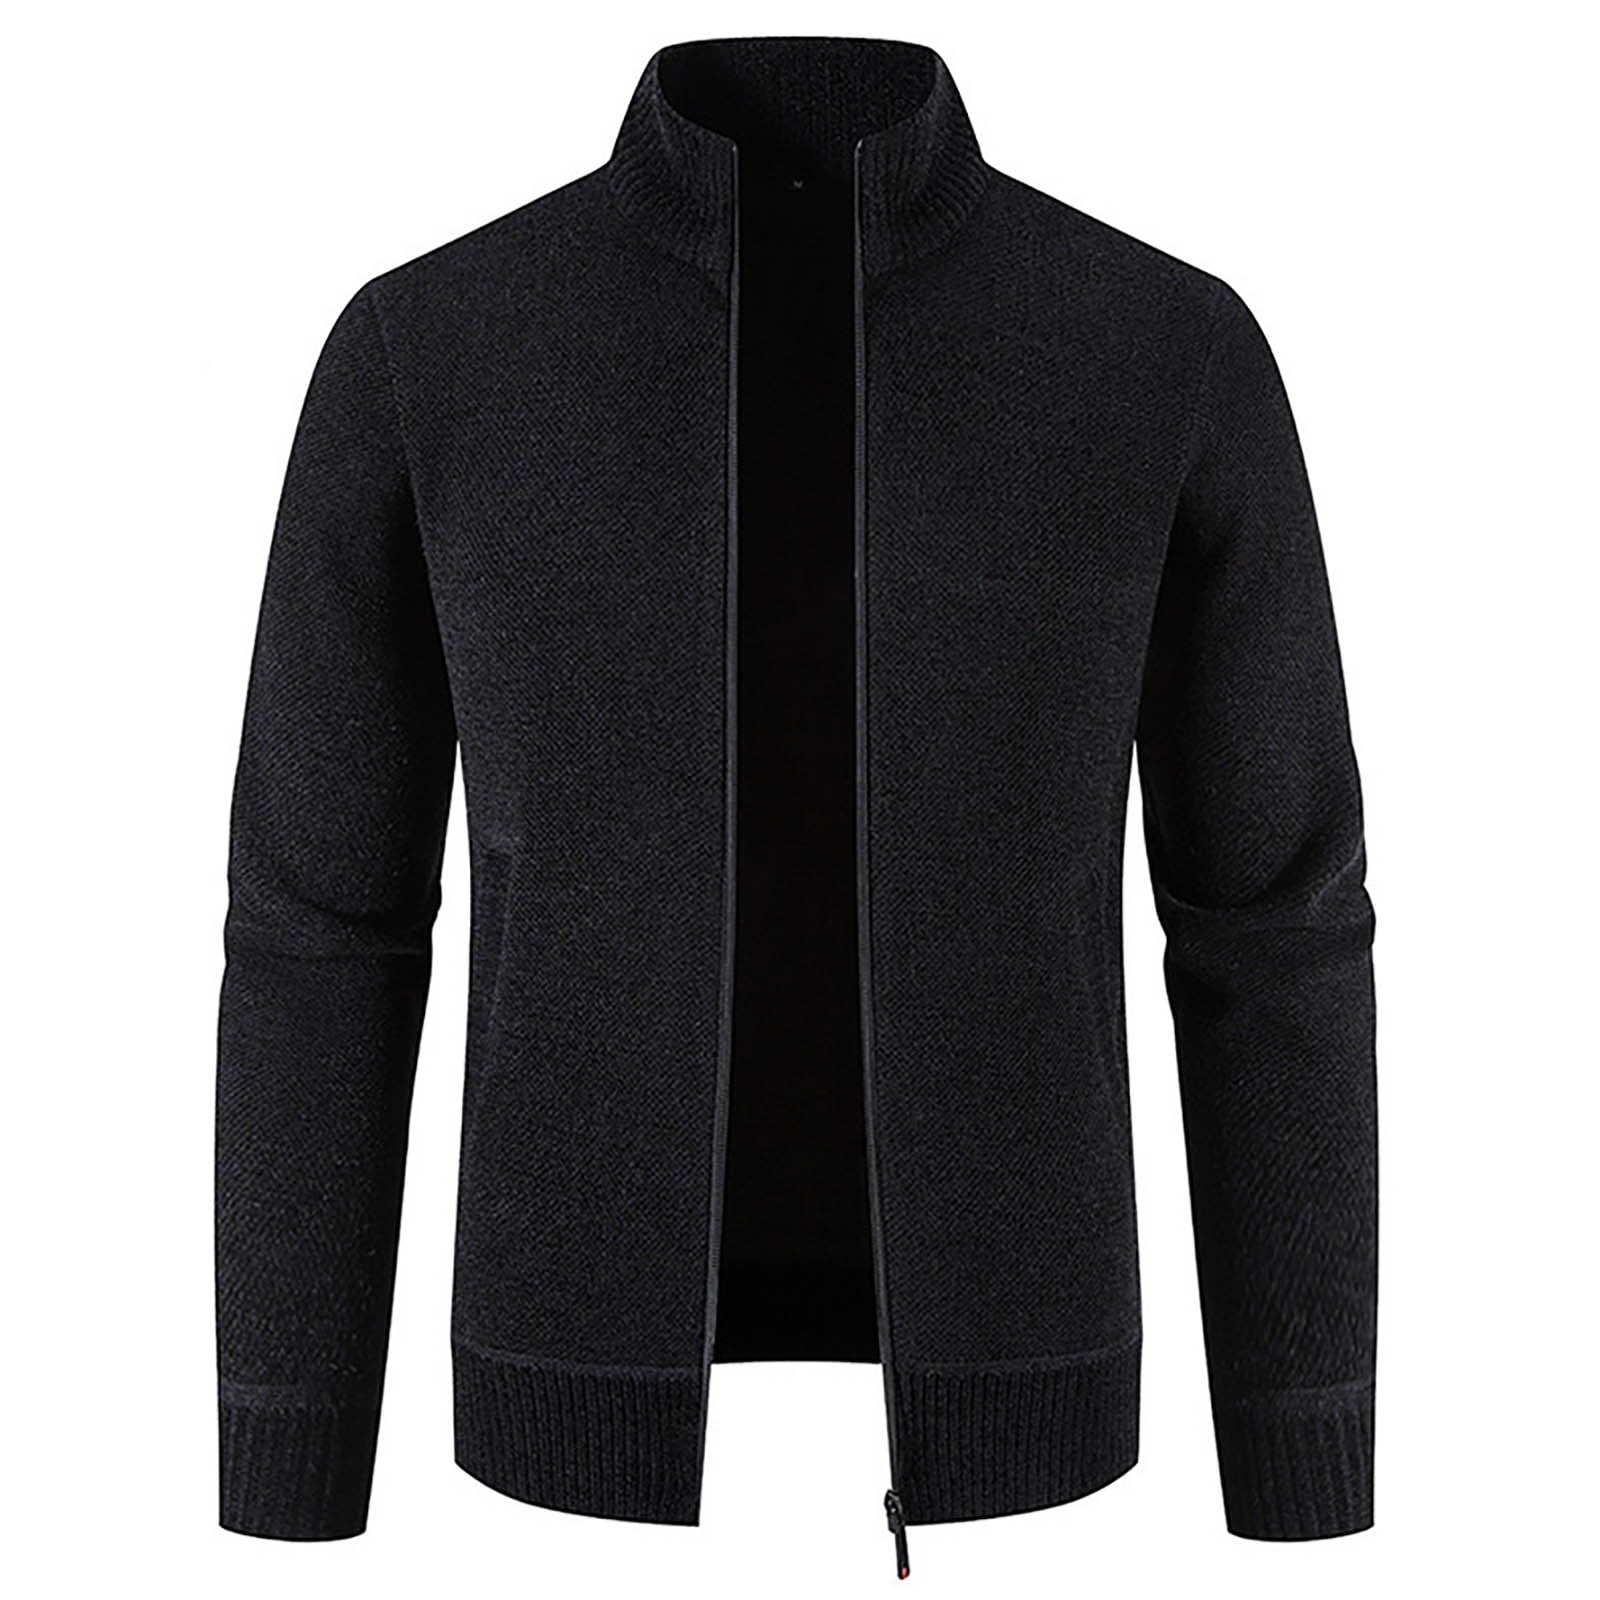 YEAHITCH Mens Dress Sweater Pullover Men Sweaters Zipper V-Neck Solid ...